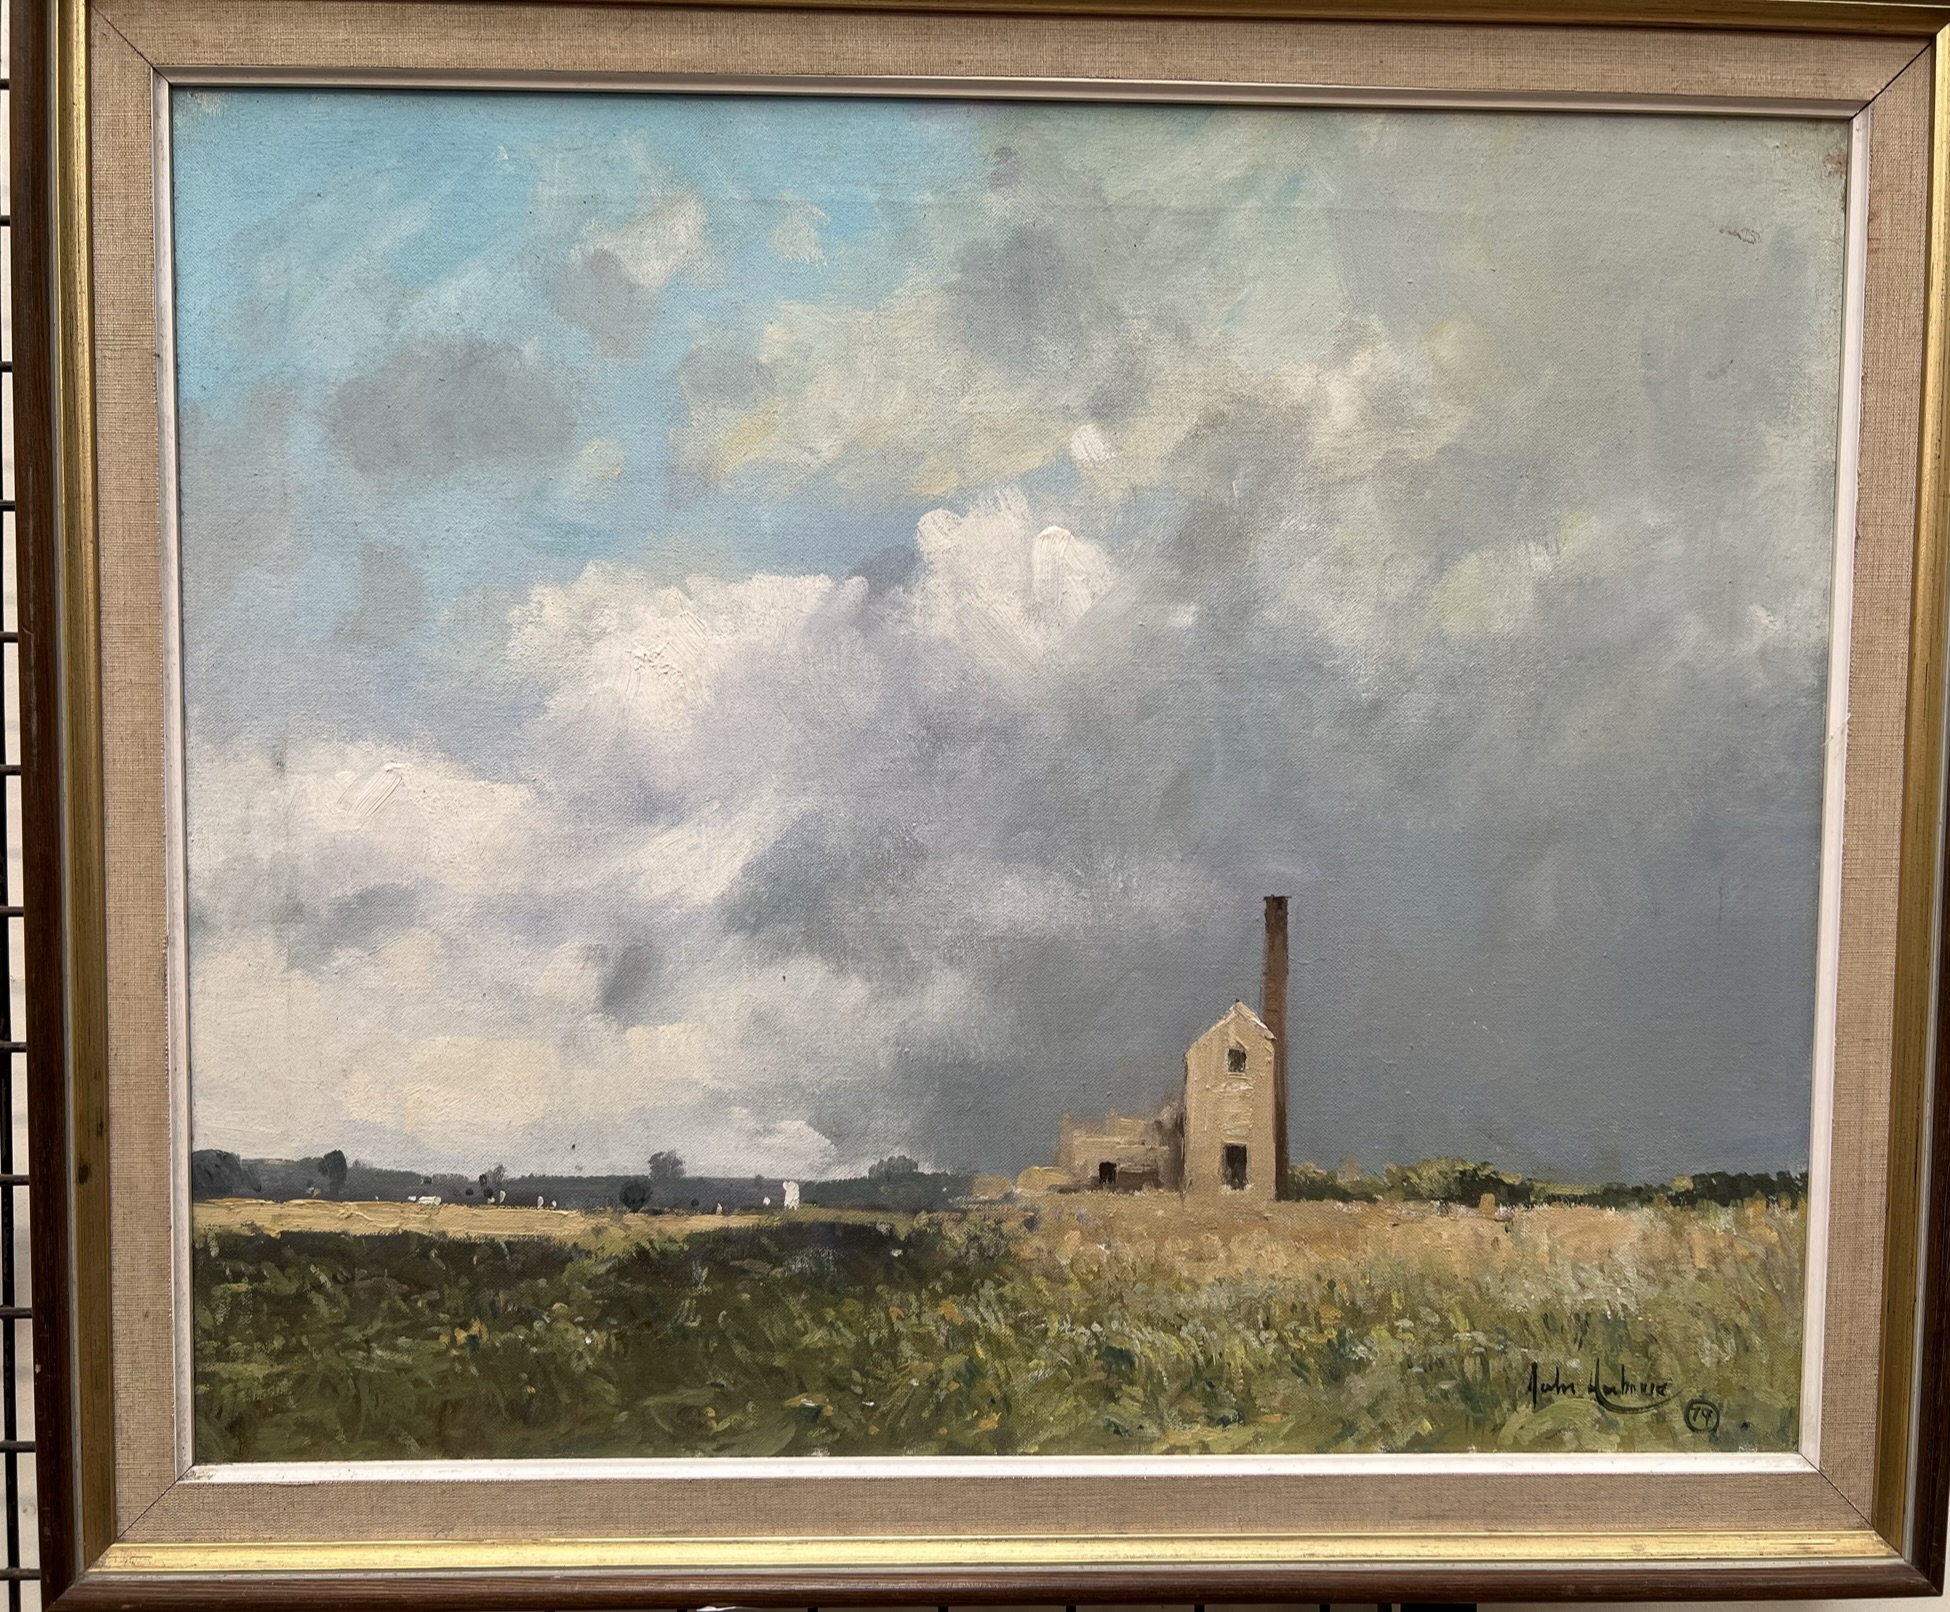 John Ambrose Cornish tin mine Oil on canvas Signed and dated '79 49.